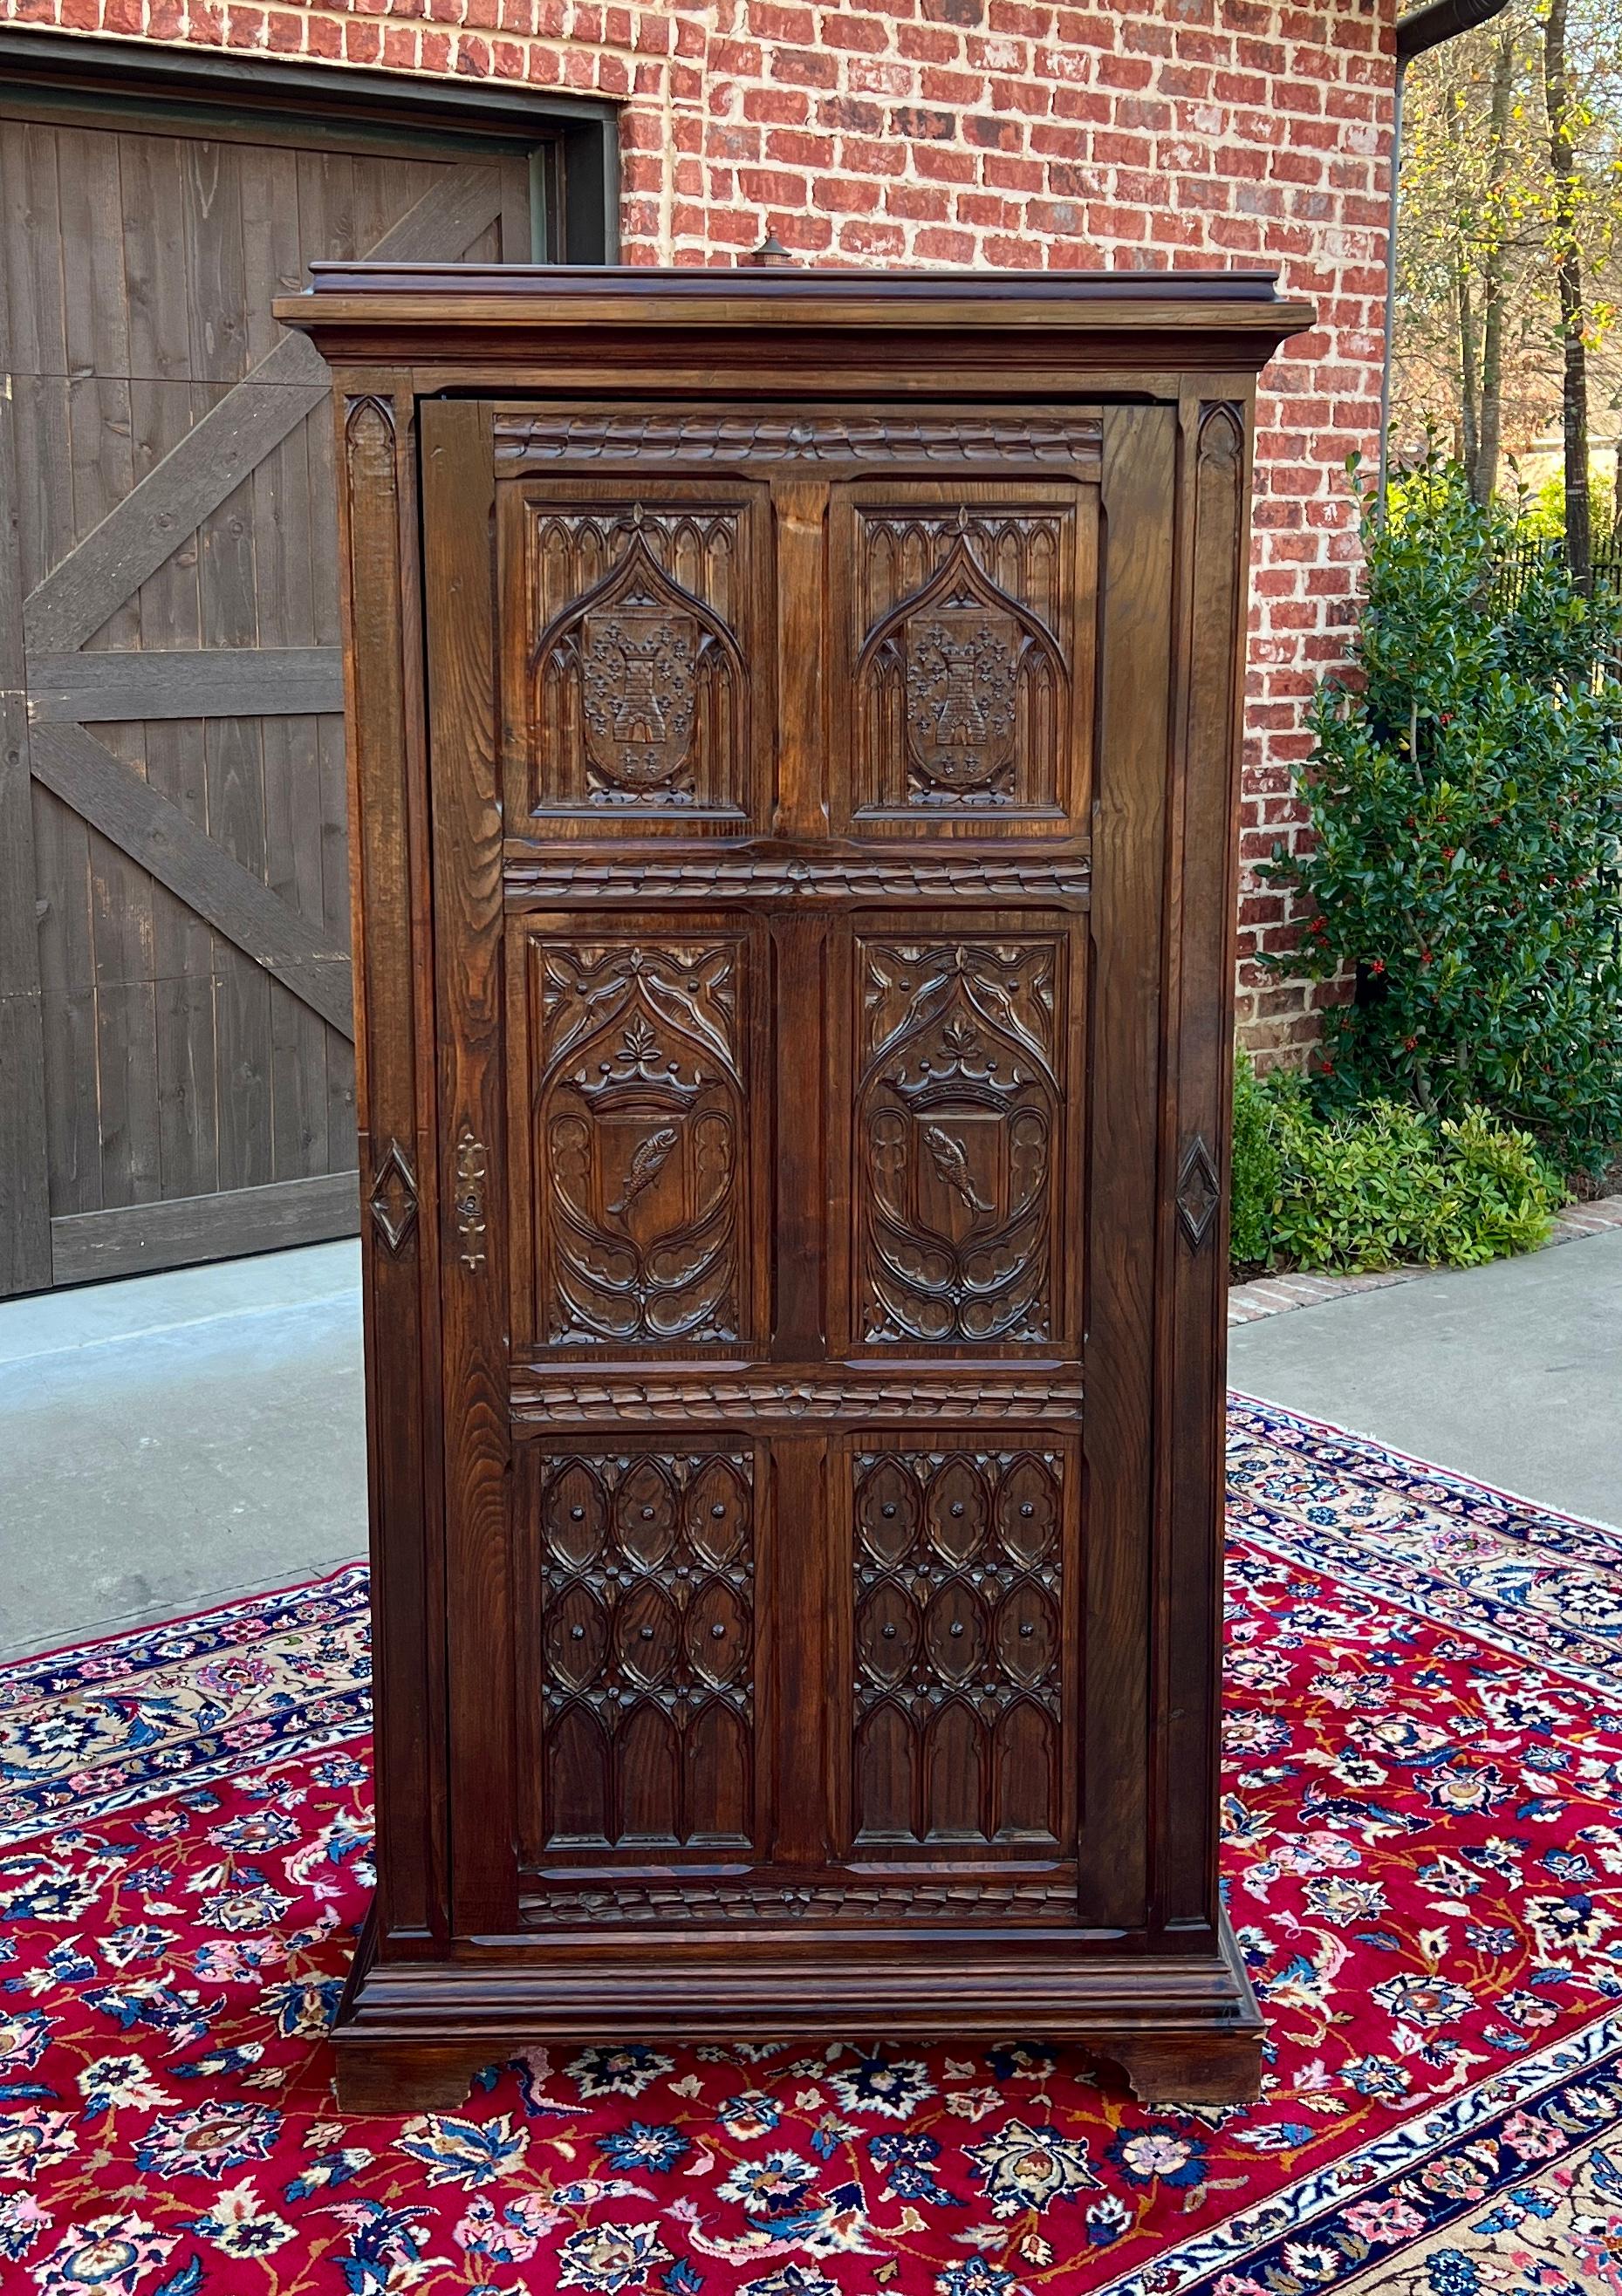 SUPERB Antique French GOTHIC REVIVAL Oak  Armoire, Linen Cabinet, Wardrobe, or Chest~~HIGHLY CARVED~~c. 
1890s 


        BEAUTIFUL STATEMENT PIECE~~19th century French Gothic Revival oak armoire, wardrobe, or linen cabinet with exquisitely carved